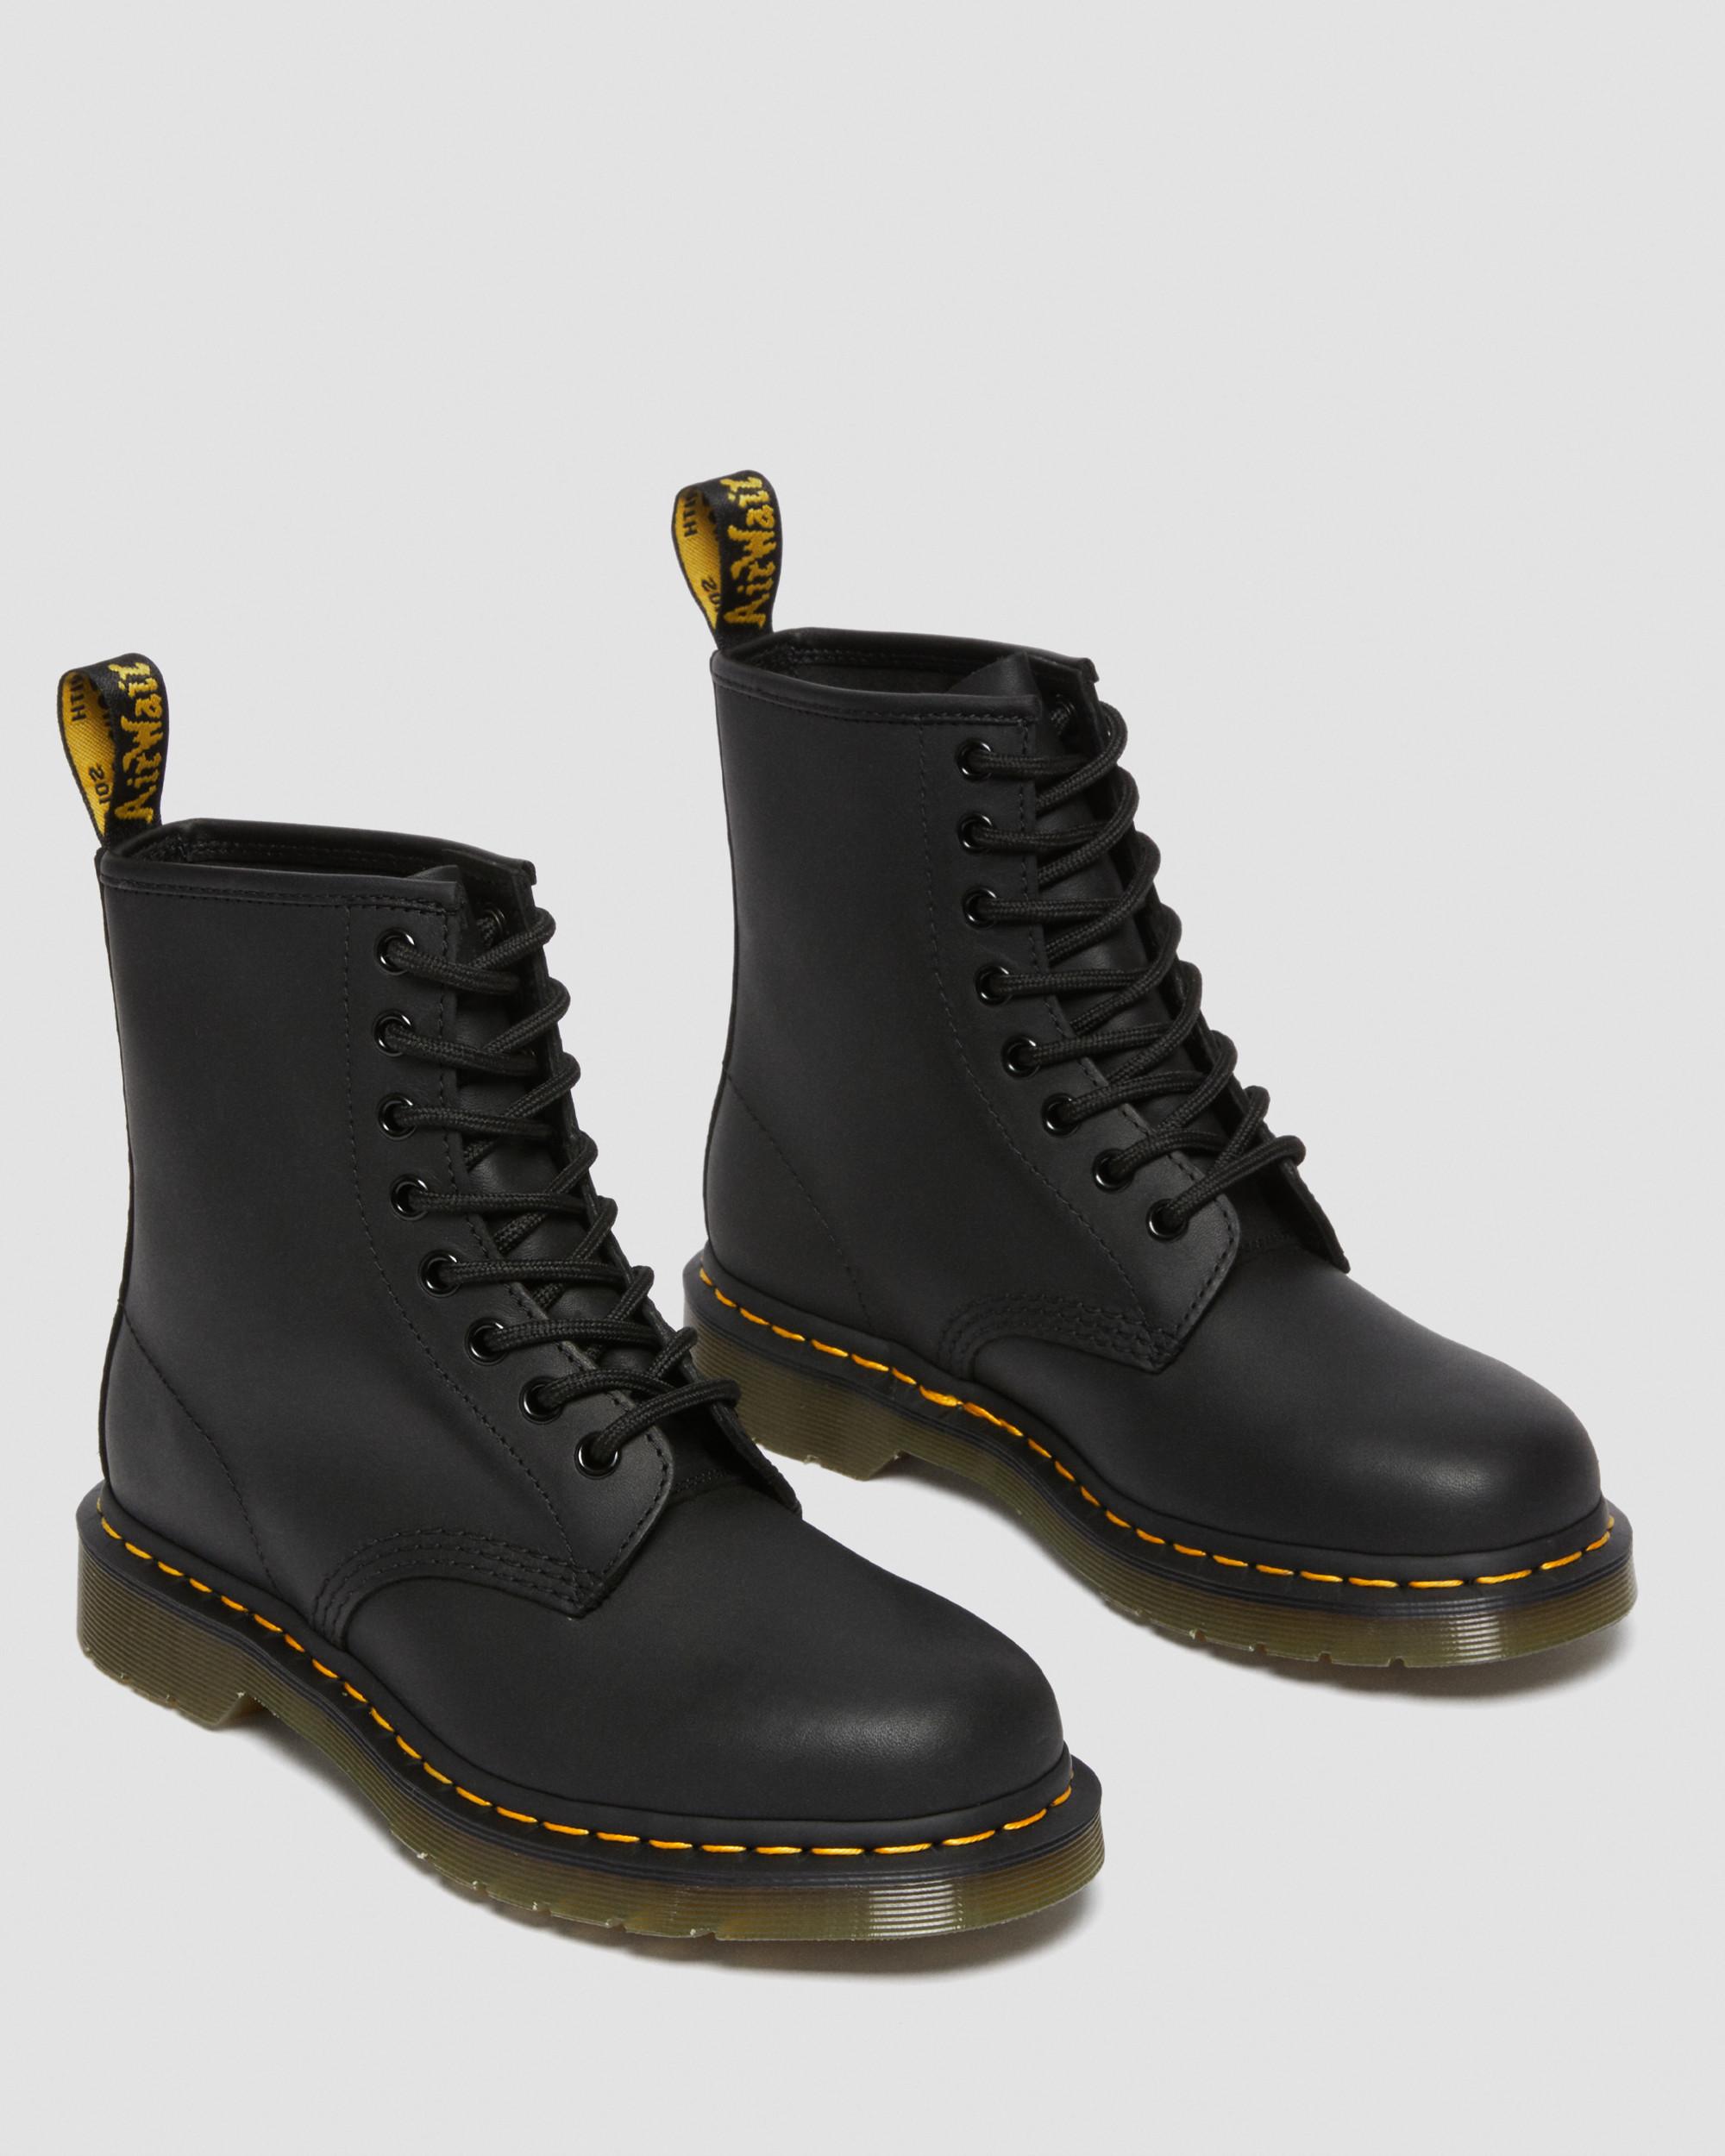 Dr Martens Shoe Laces: Lace Up in Style & Durability